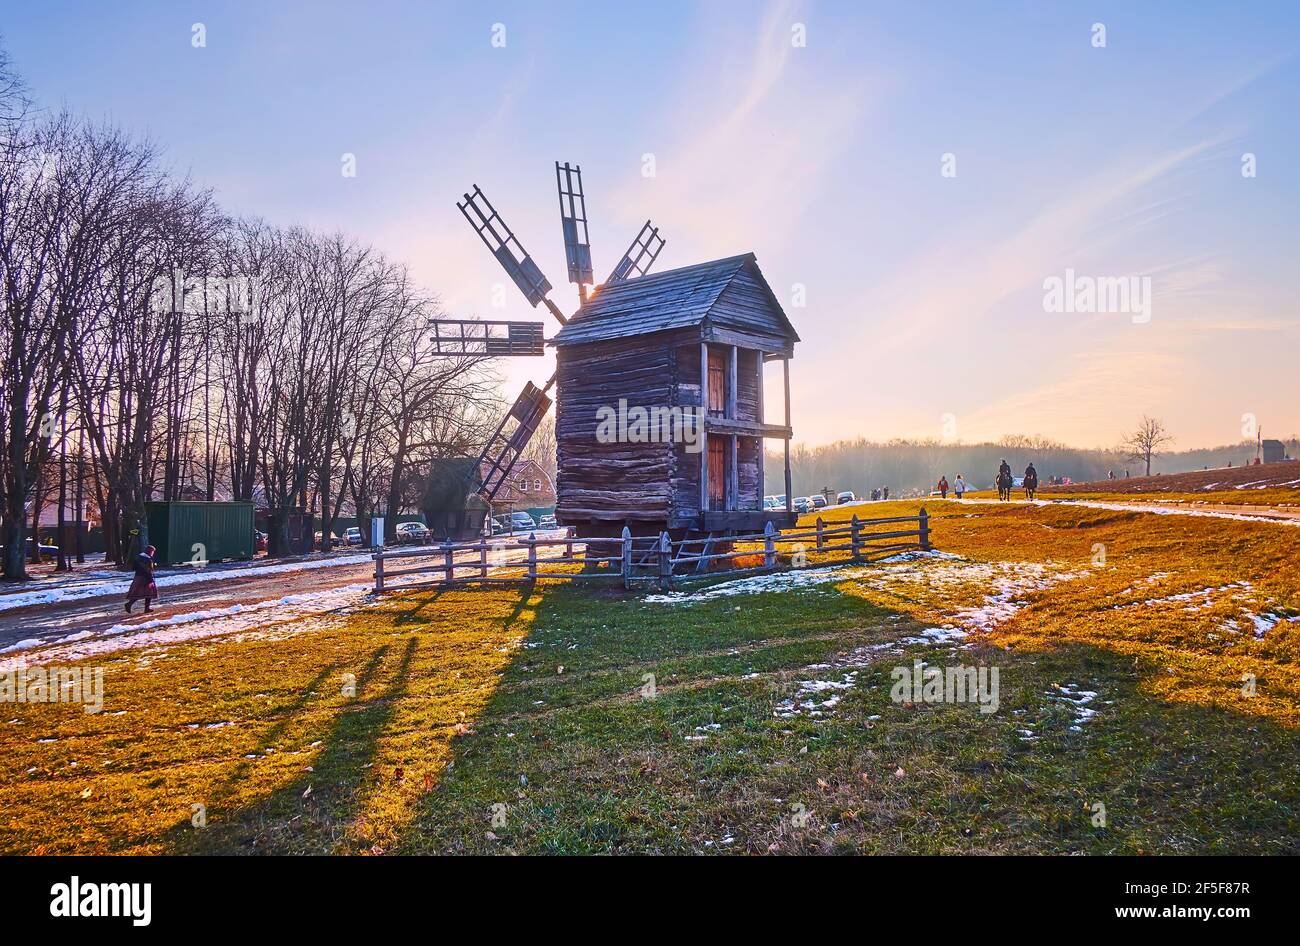 The evening sun is seen through the sails of the old timber windmill, Pyrohiv Skansen, Kyiv, Ukraine Stock Photo